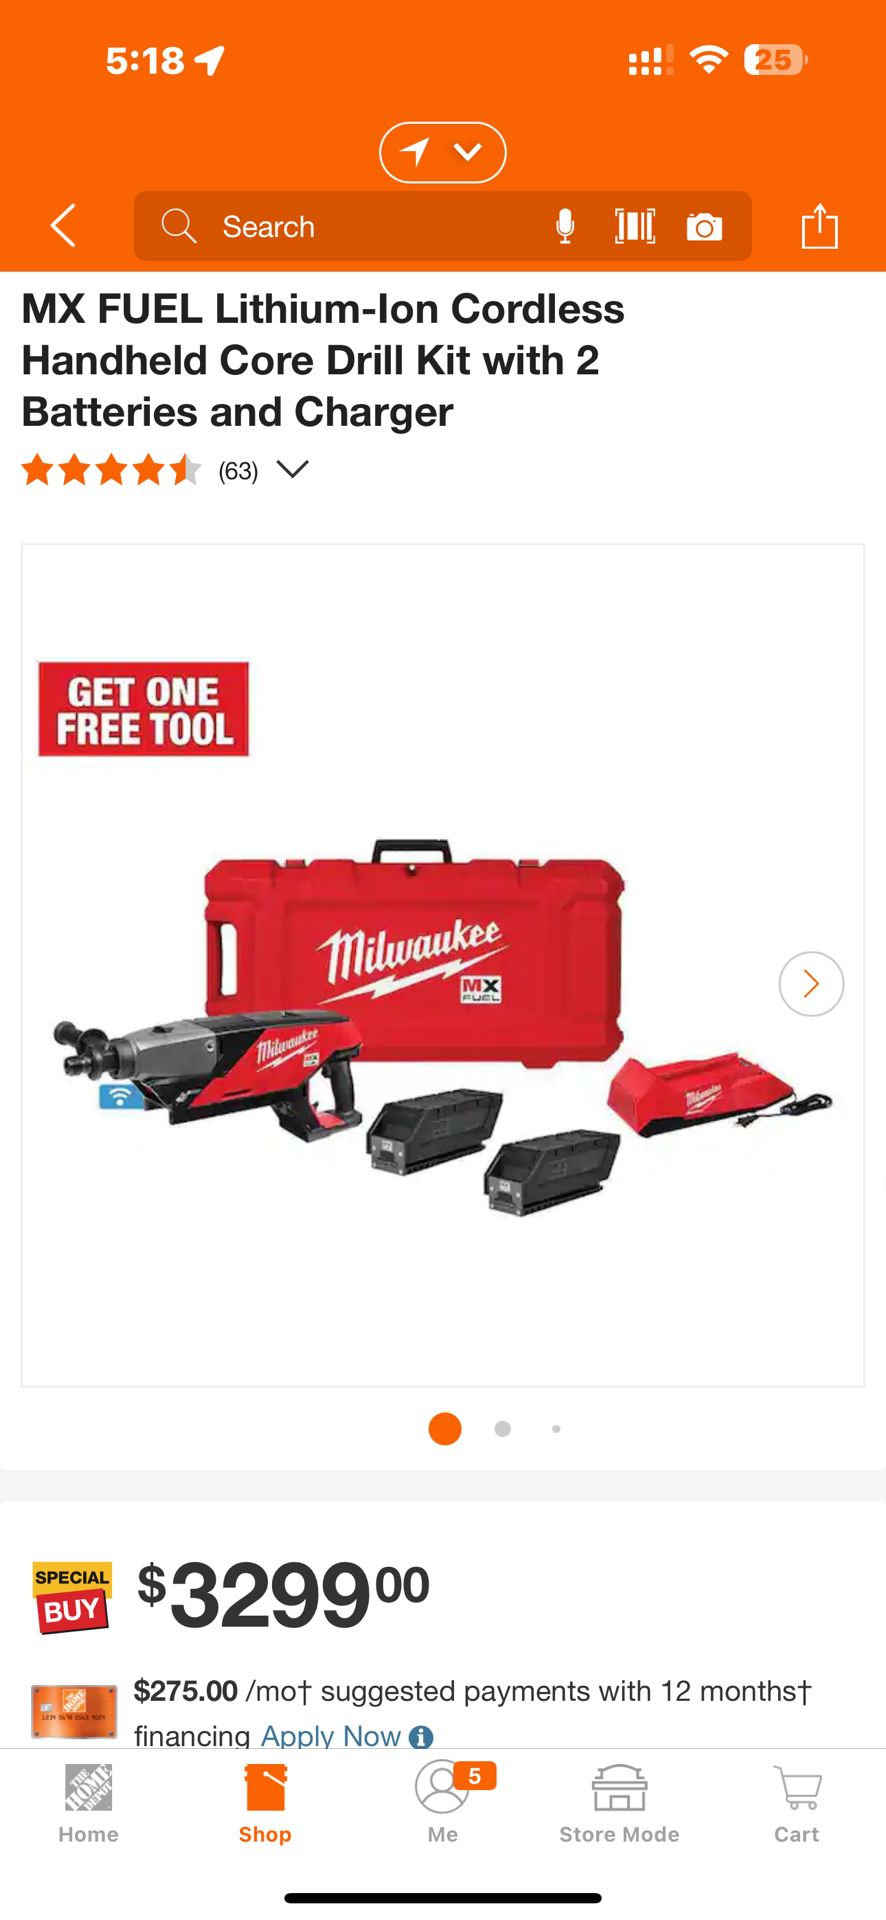 Milwaukee MX FUEL Lithium-Ion Cordless Handheld Core Drill Kit with 2 Batteries & Charger (No Stand)